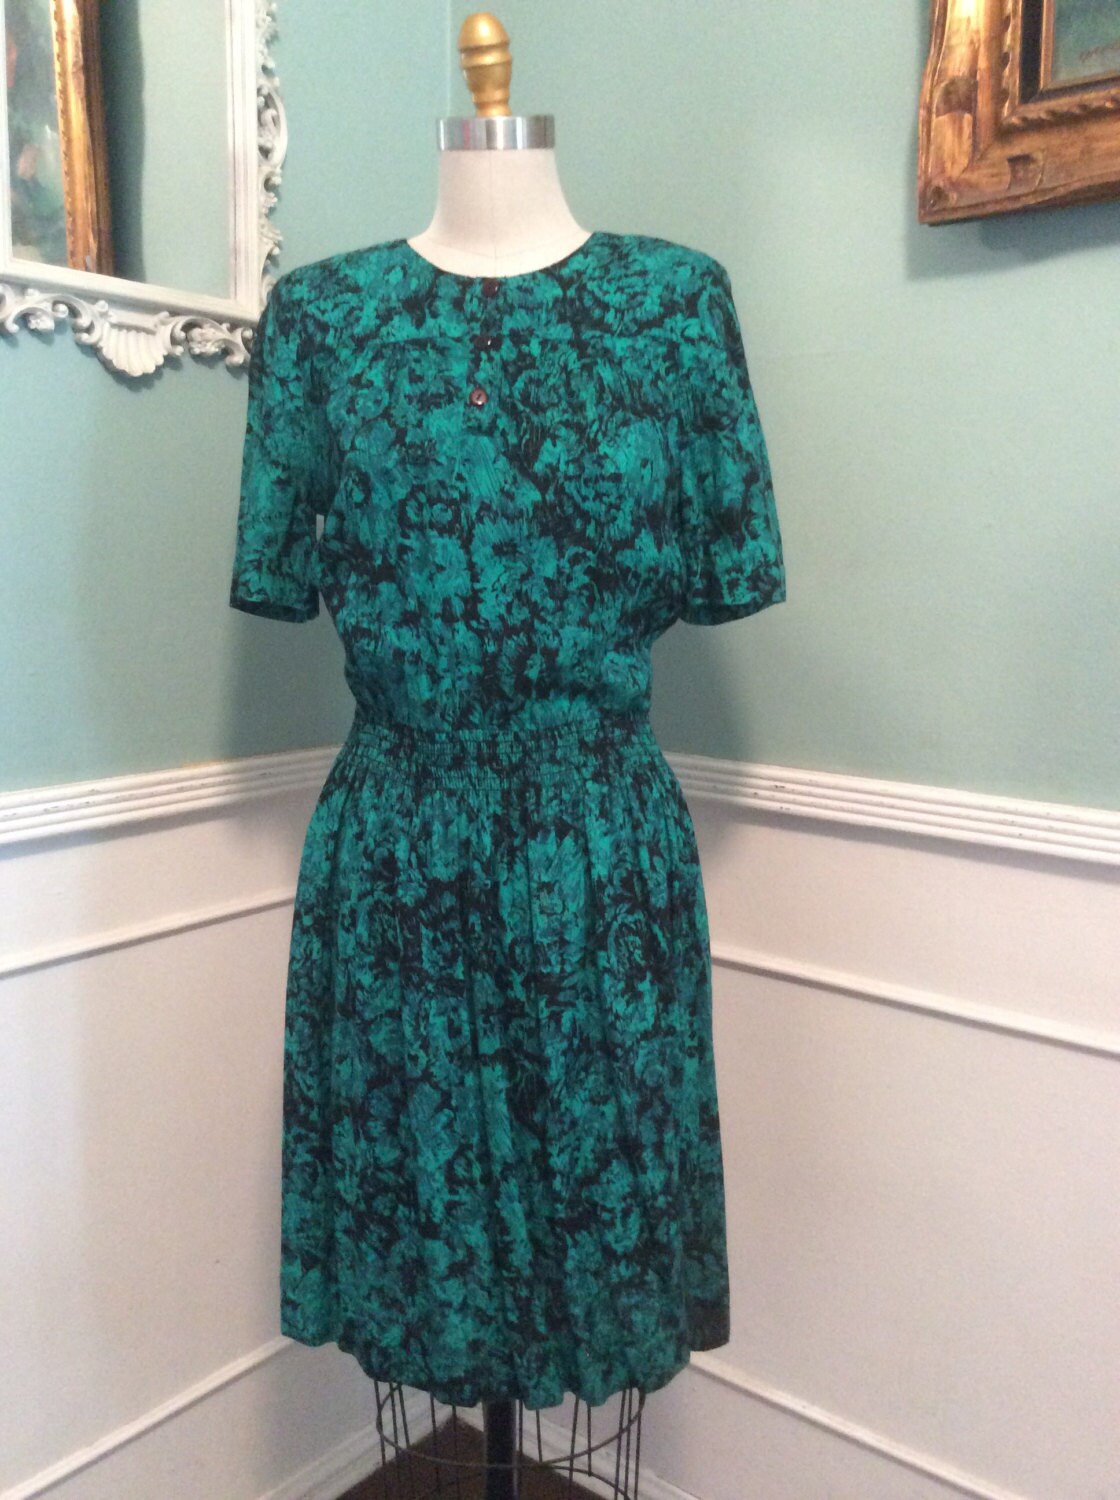 Vintage 80's Green and Black Day Dress. - Etsy